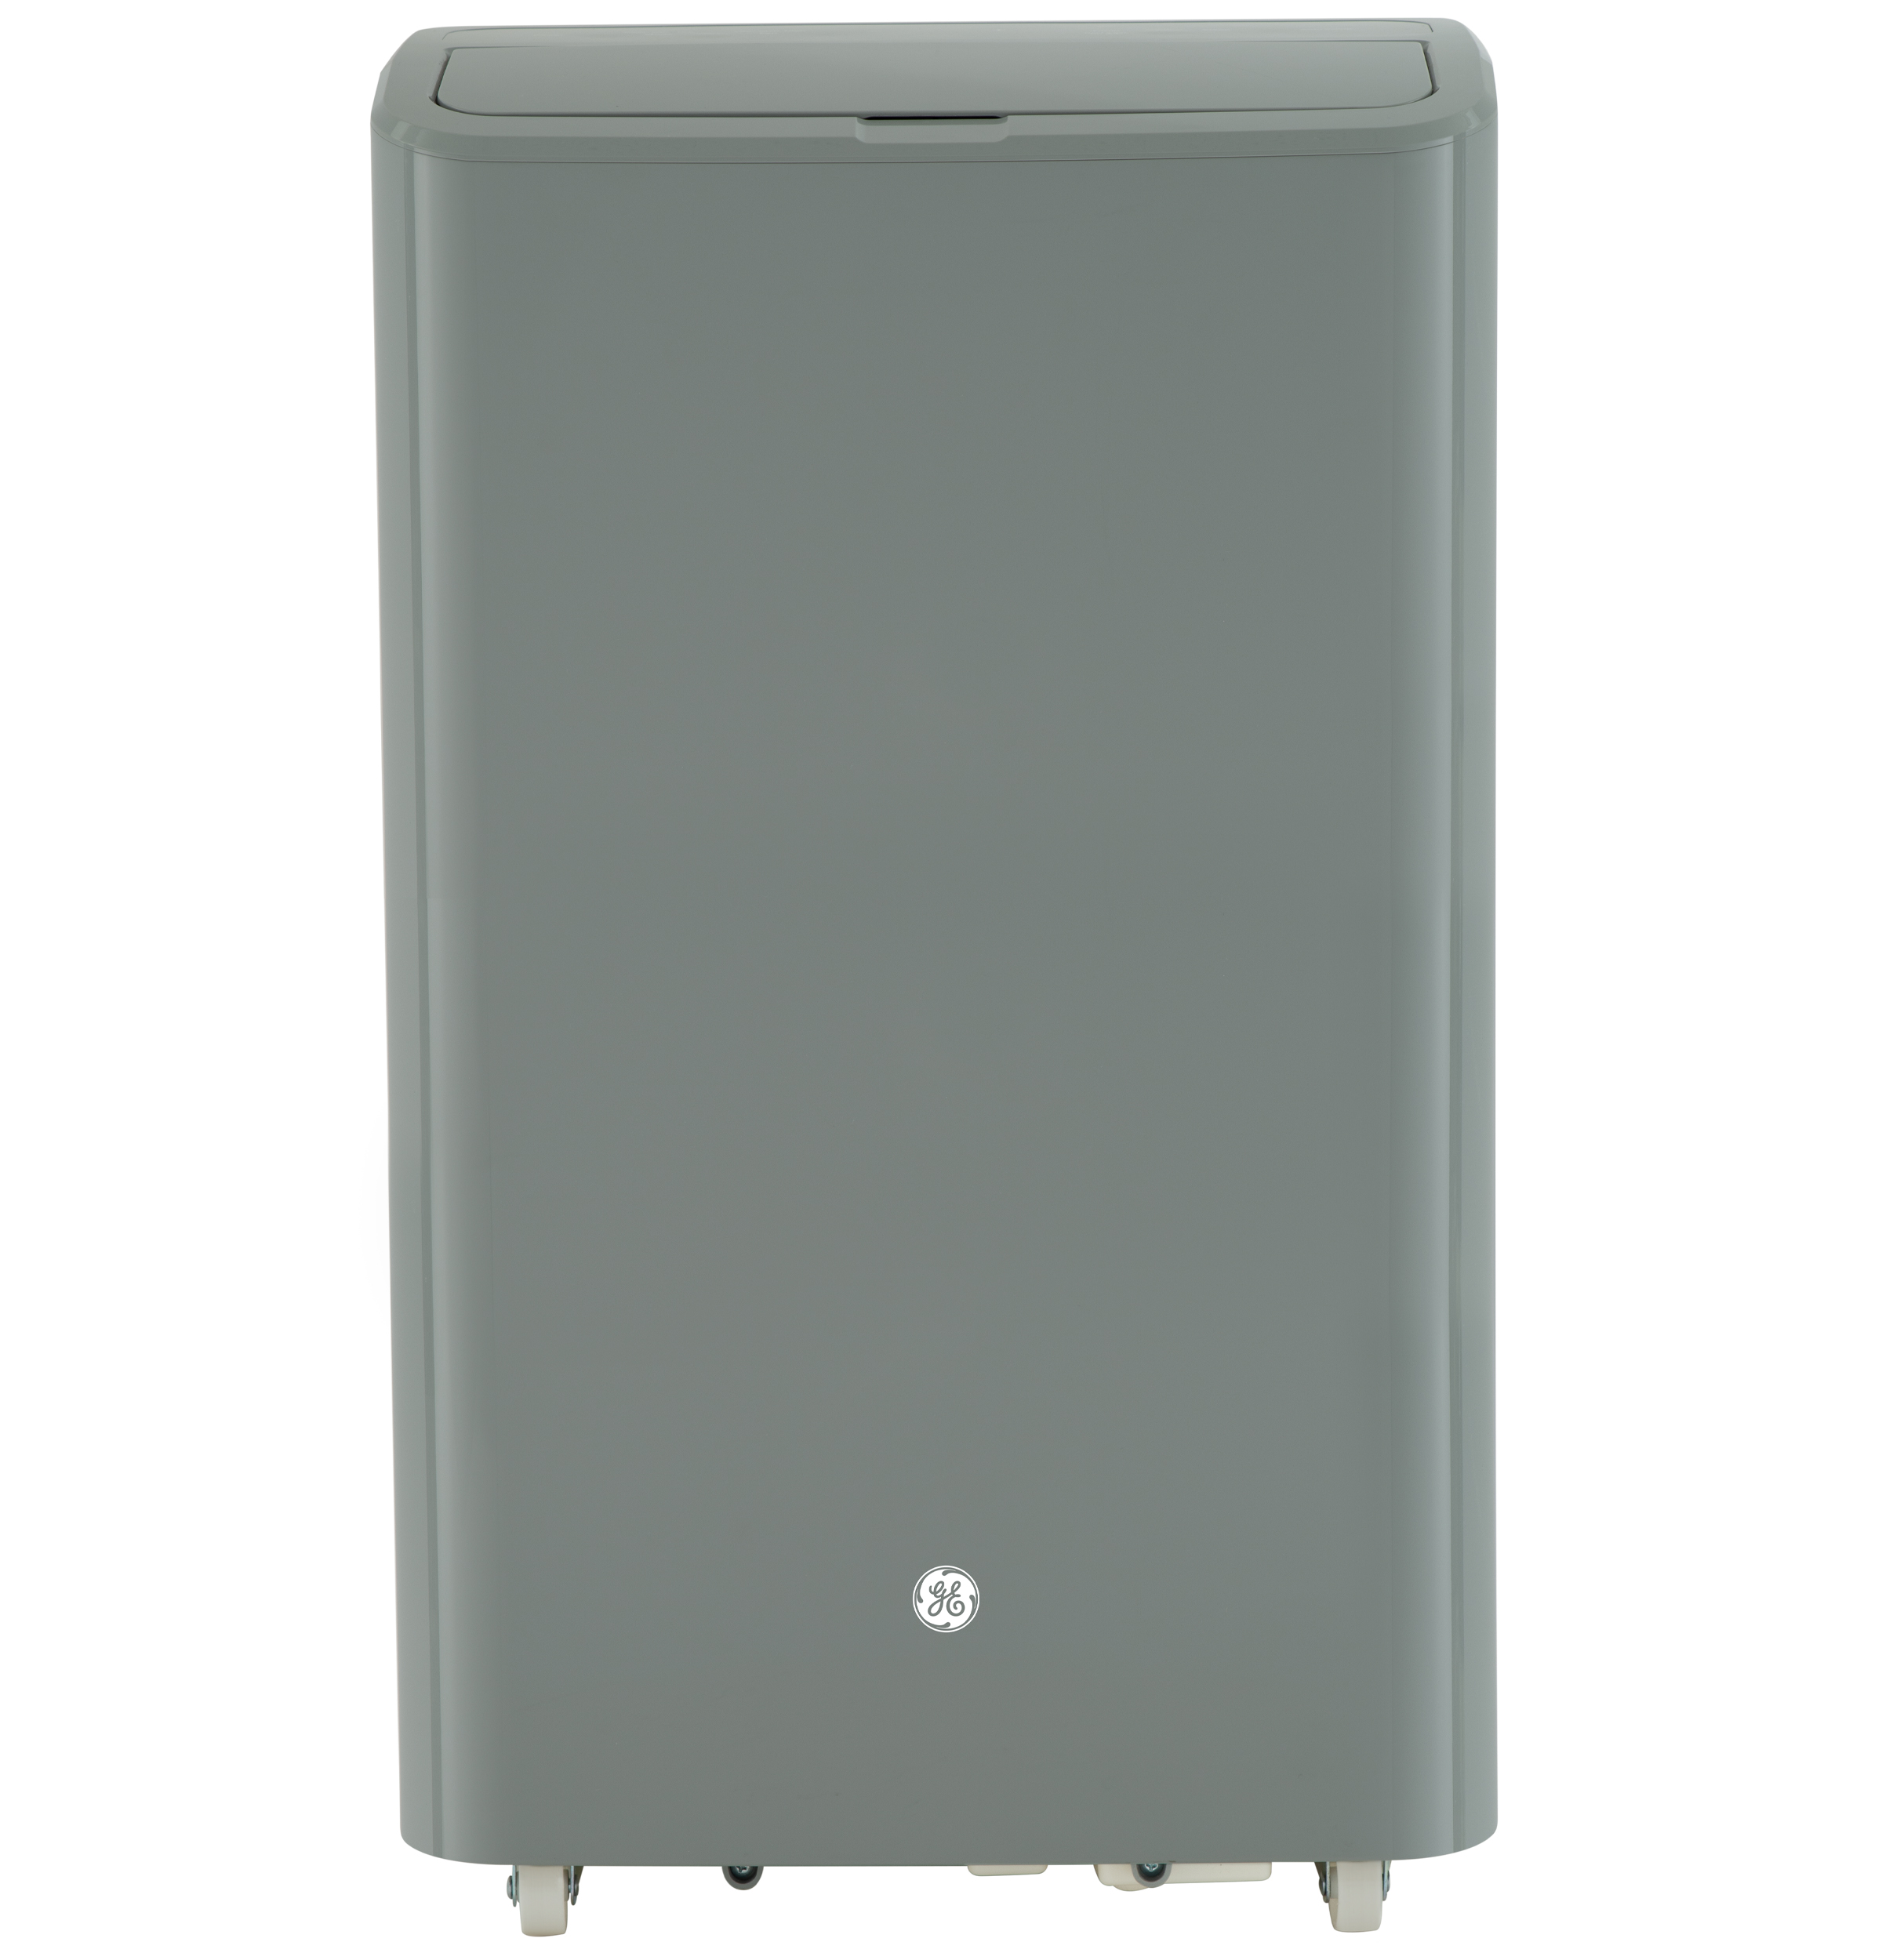 GE® 8,500 BTU Heat/Cool Portable Air Conditioner with Dehumidifier and Remote, Grey